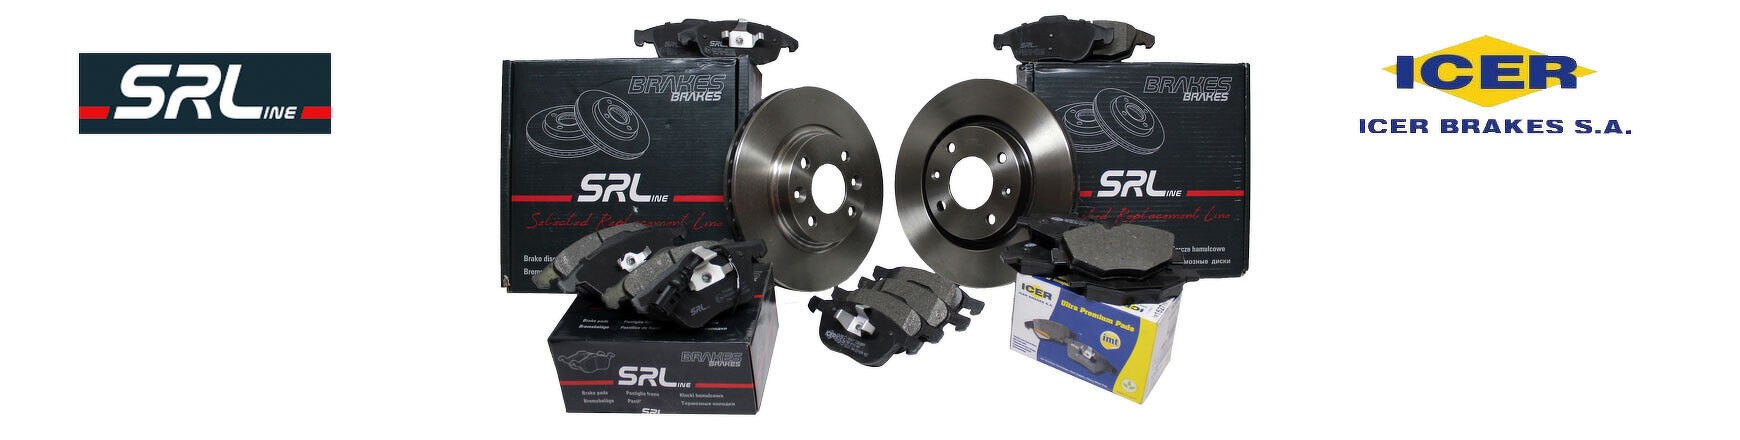 Wide Selection of Braking Systems at Competitive Prices | Veramauto.es